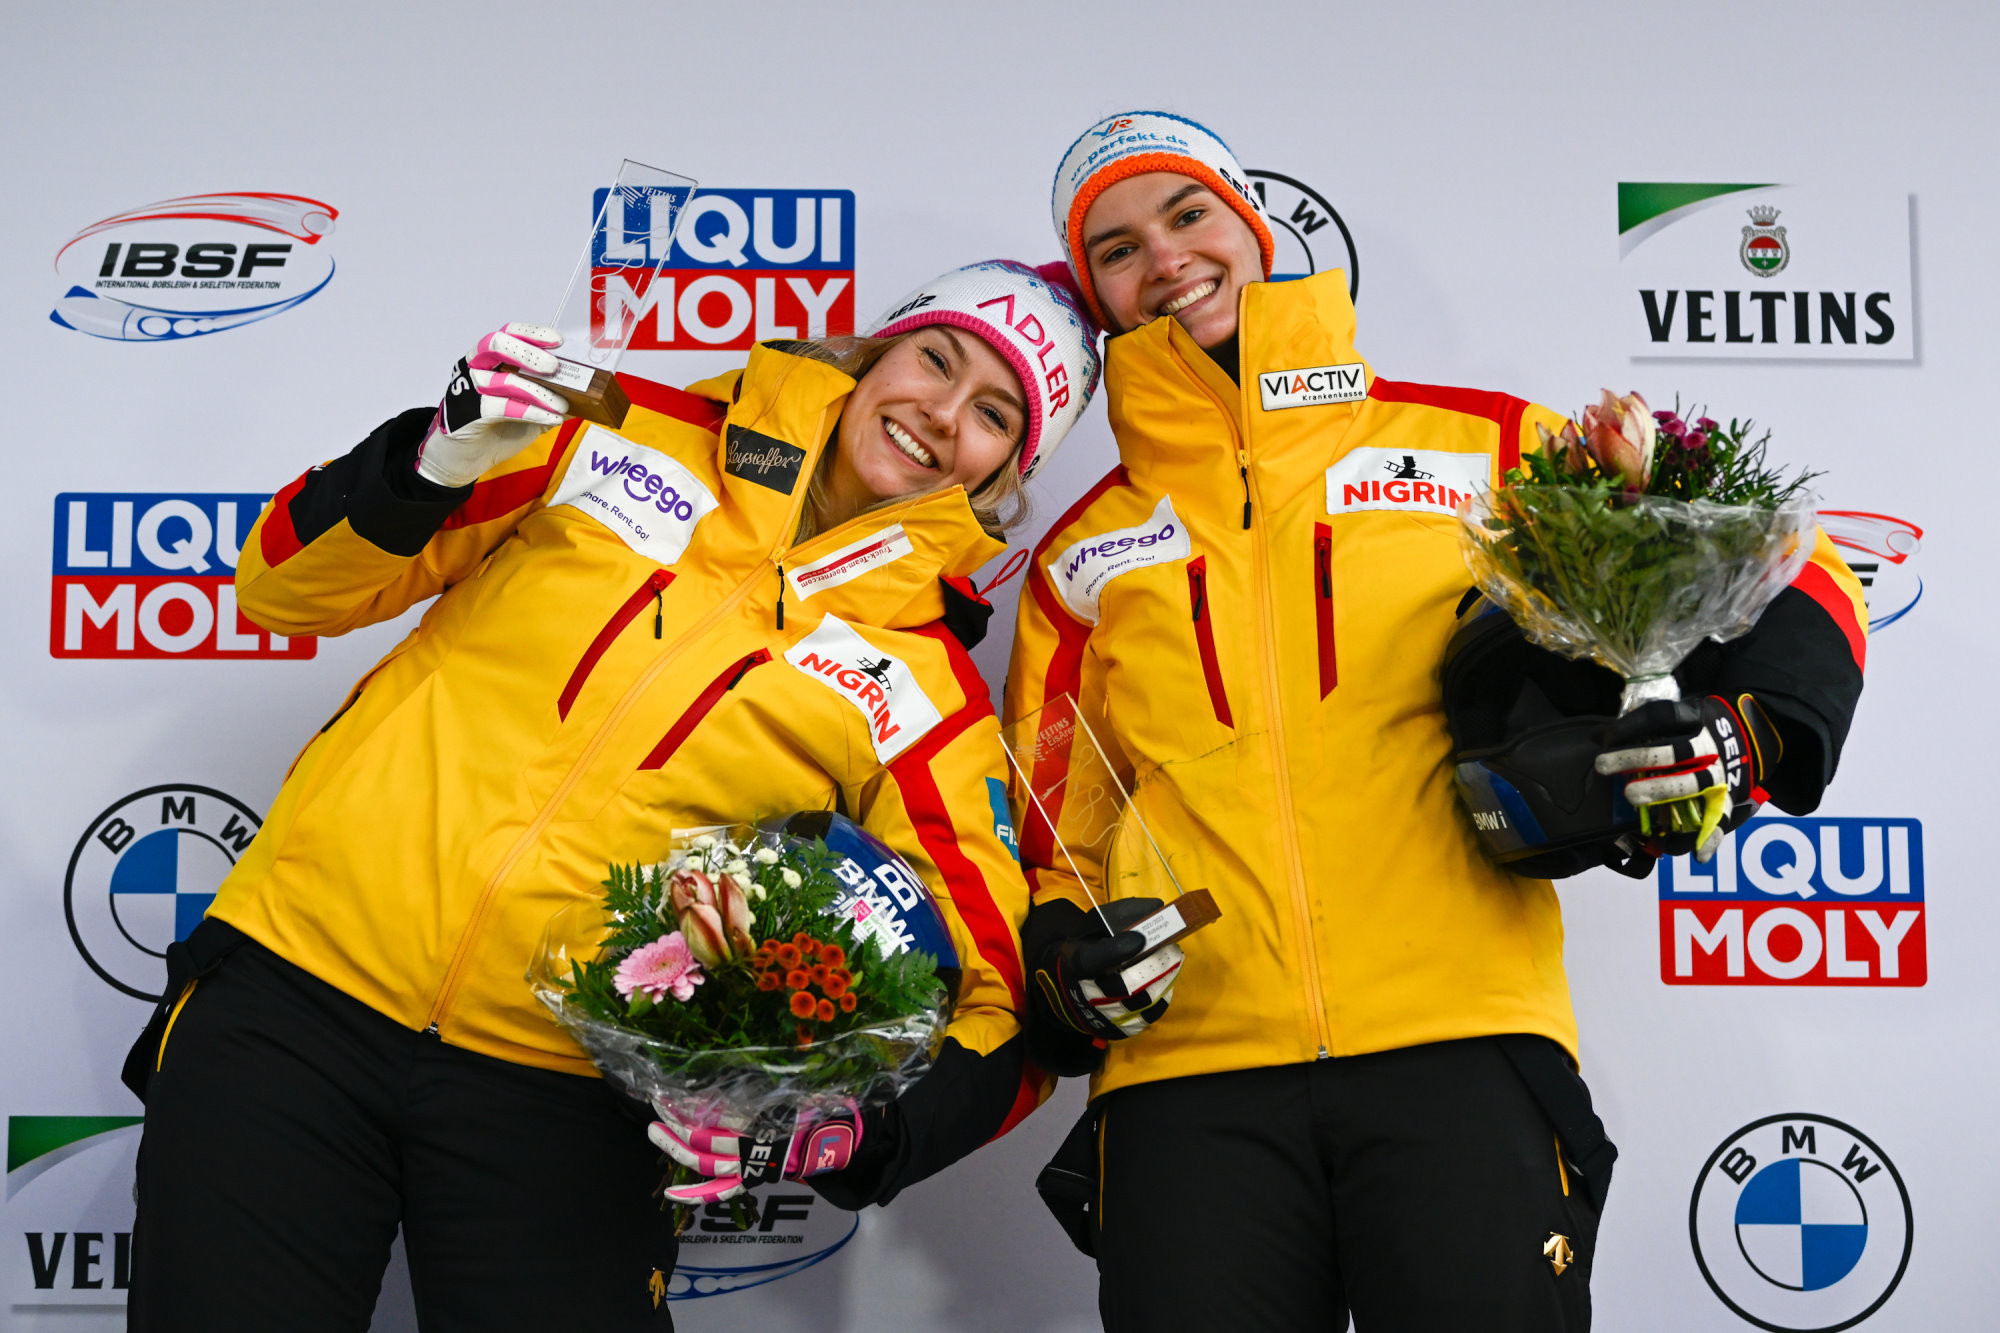 Germans dominate two-woman podium at IBSF World Cup in Winterberg